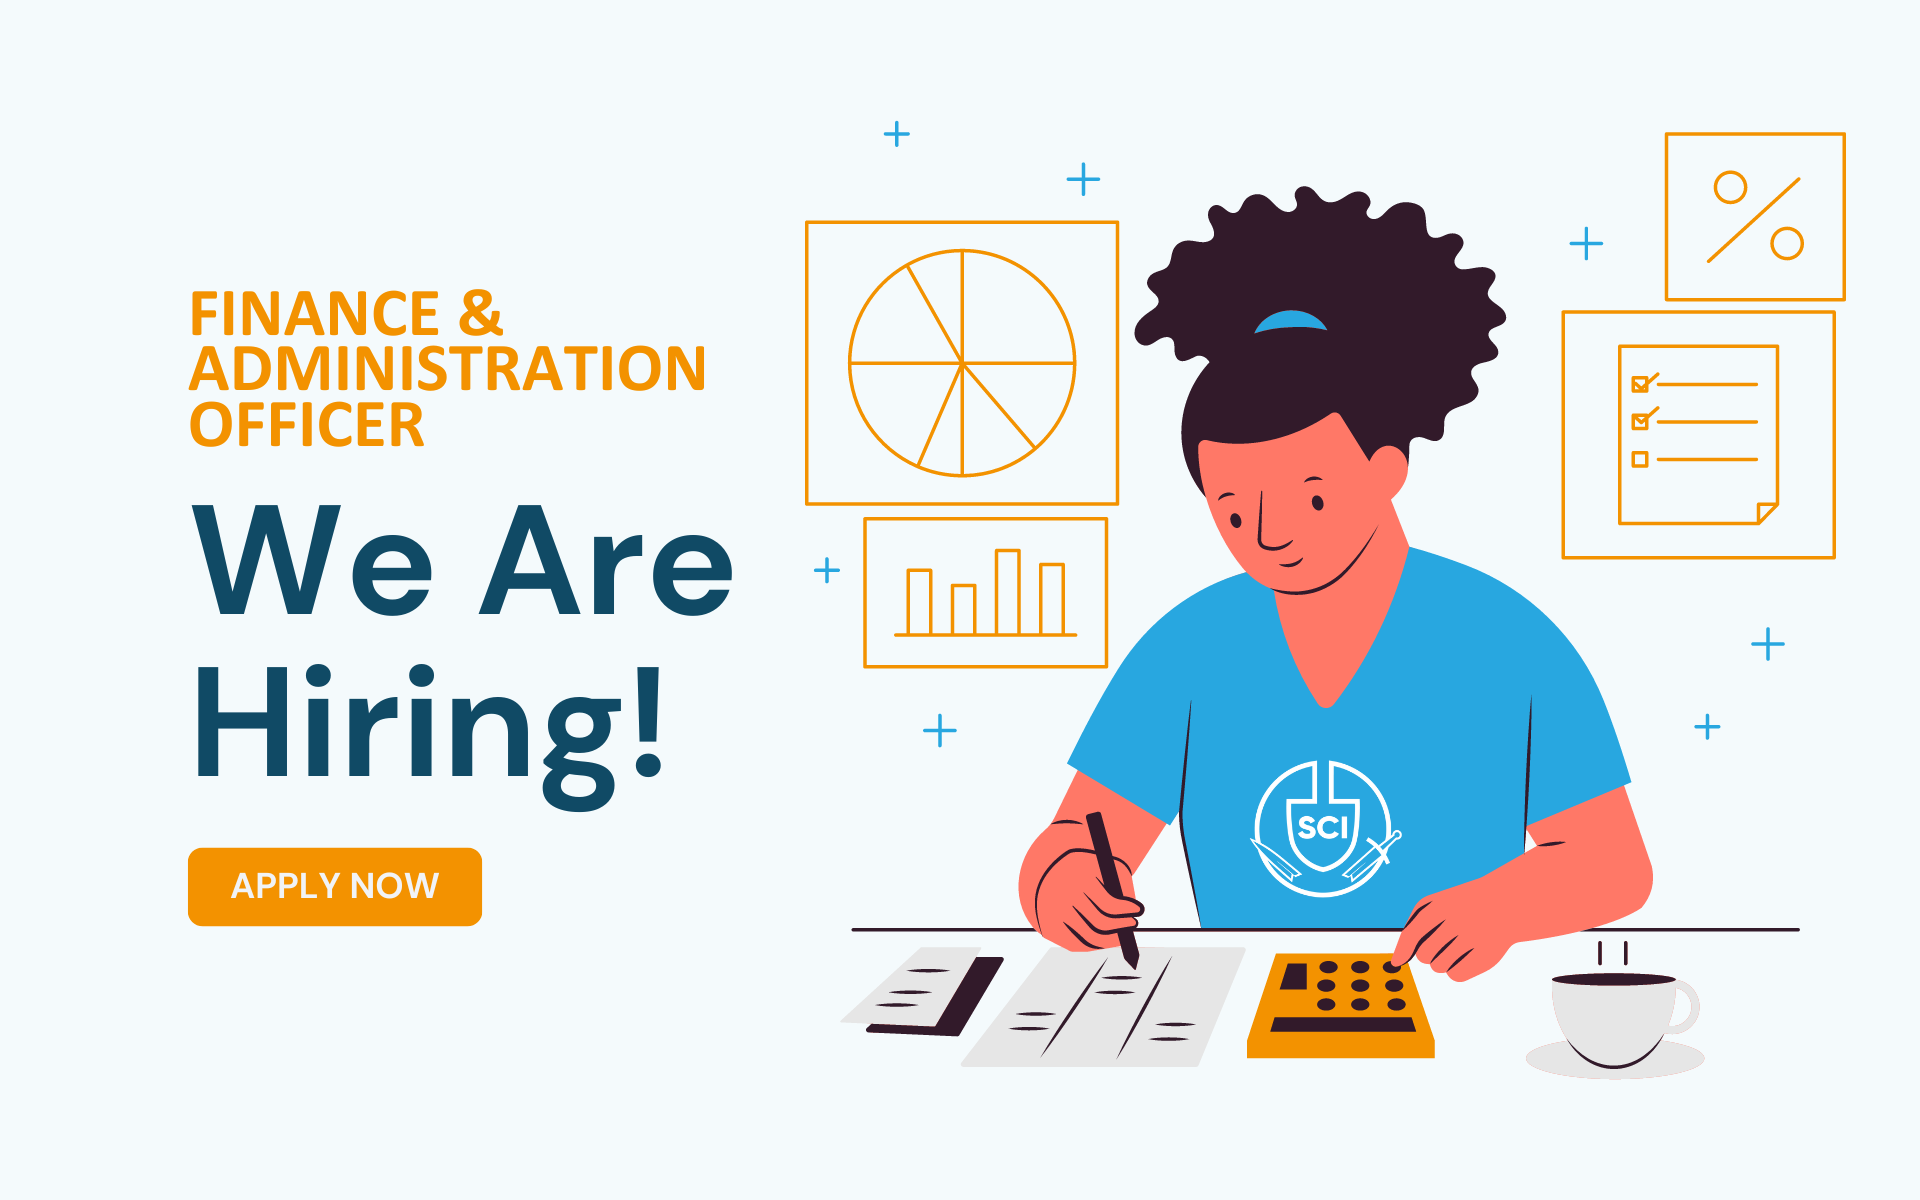 SCI is are hiring! Finance and administration officer